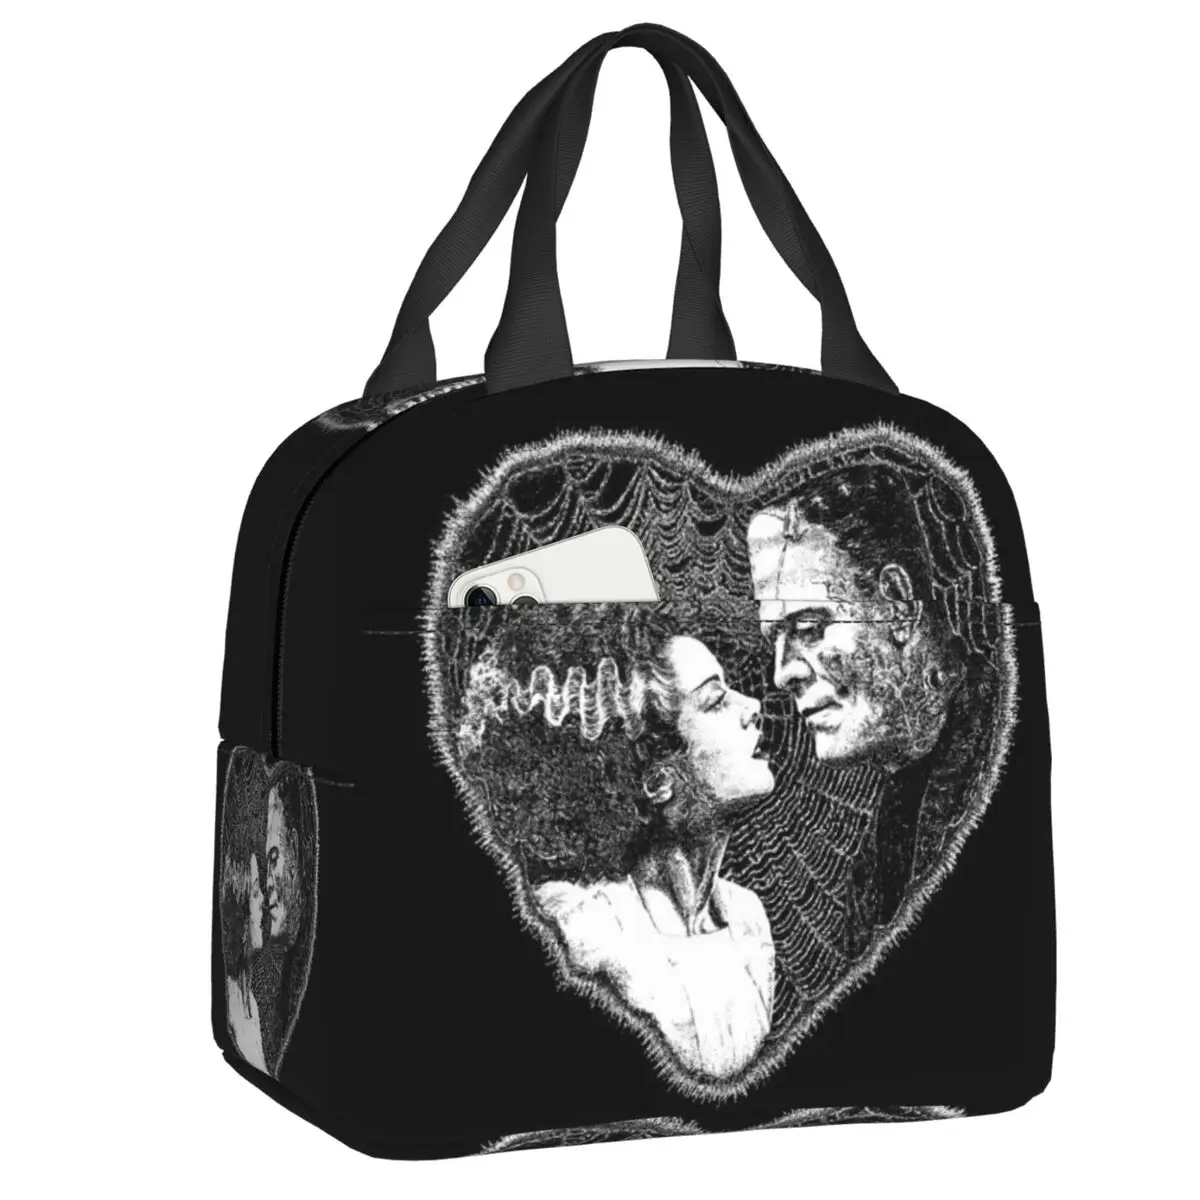 Bride Of Frankenstein Lunch Box for Women Waterproof Halloween Horror Film Cooler Thermal Food Insulated Lunch Bag Picnic Bags